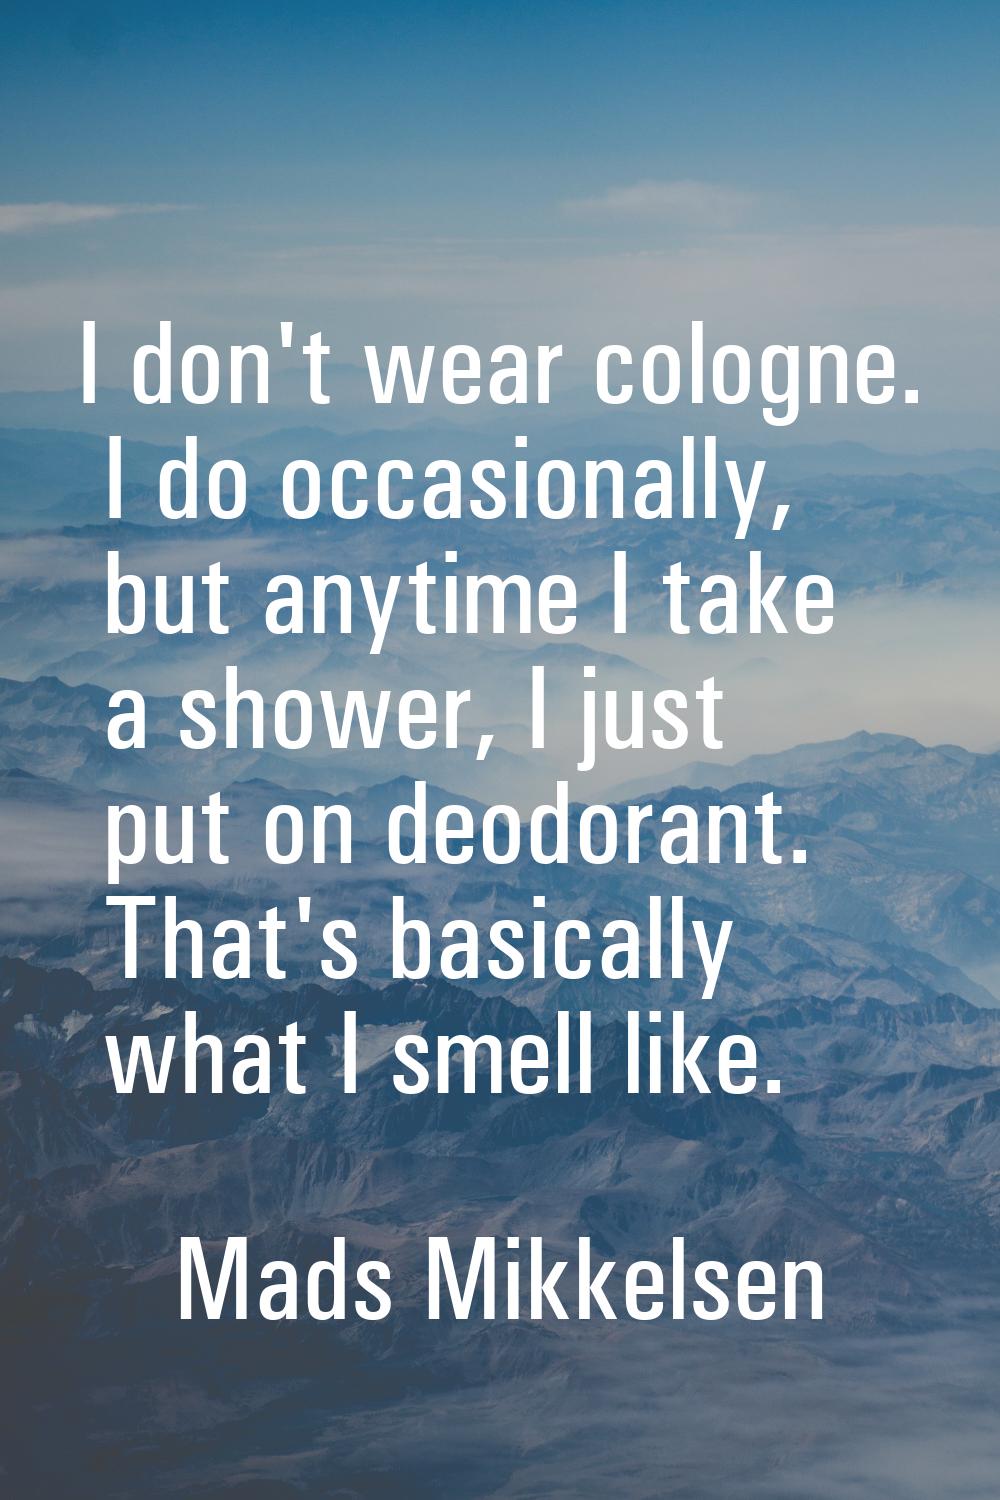 I don't wear cologne. I do occasionally, but anytime I take a shower, I just put on deodorant. That